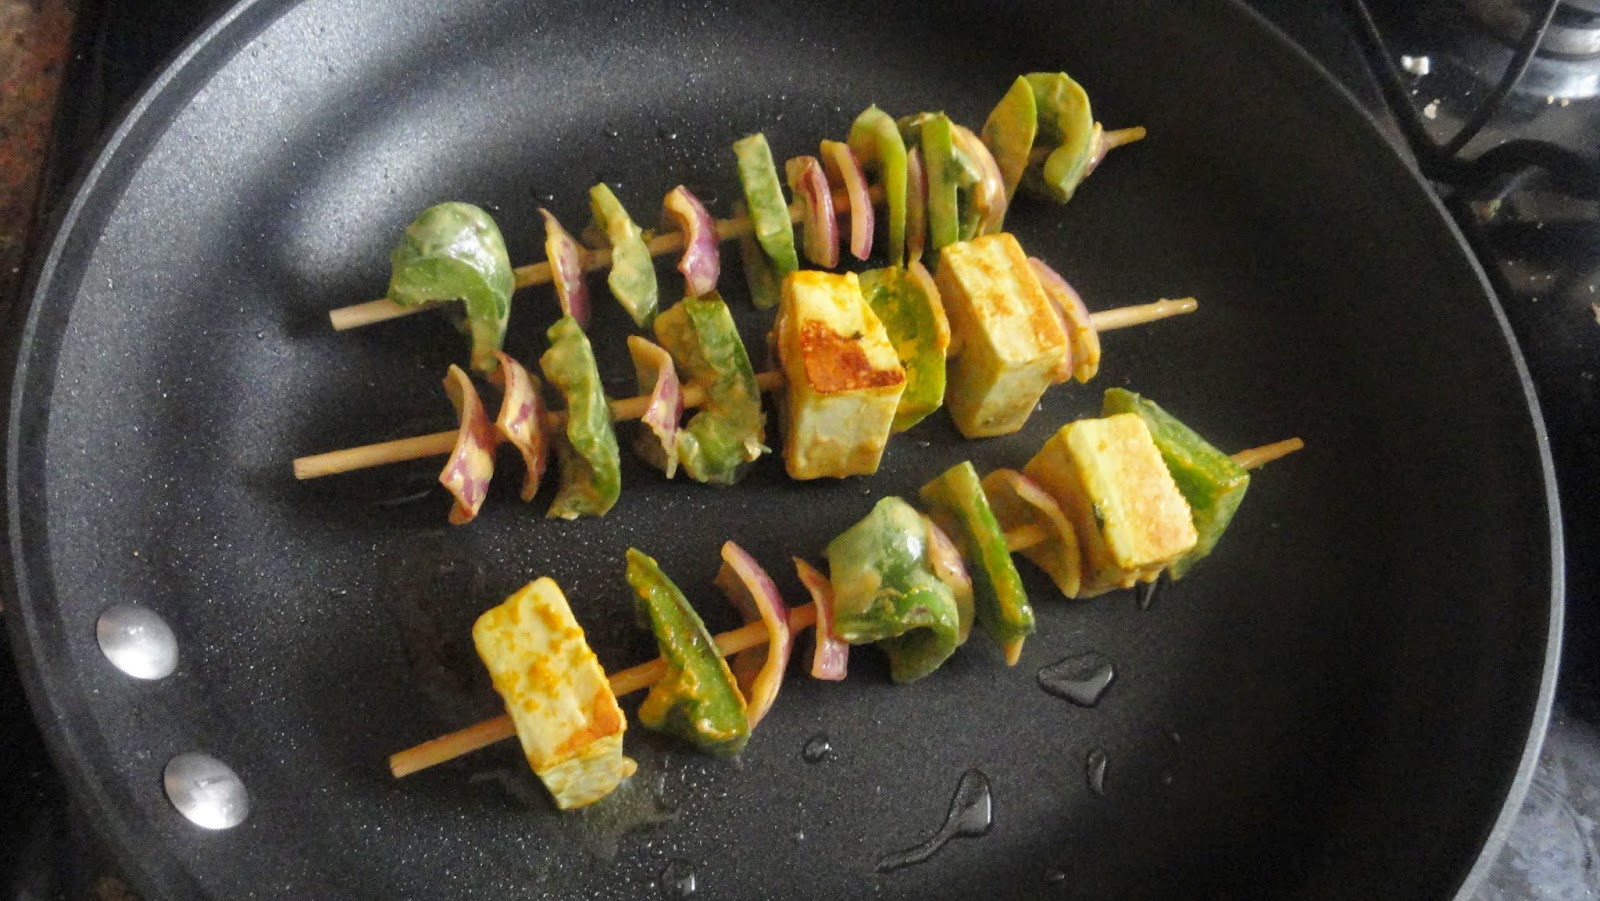 Place the skewers in pan with oil